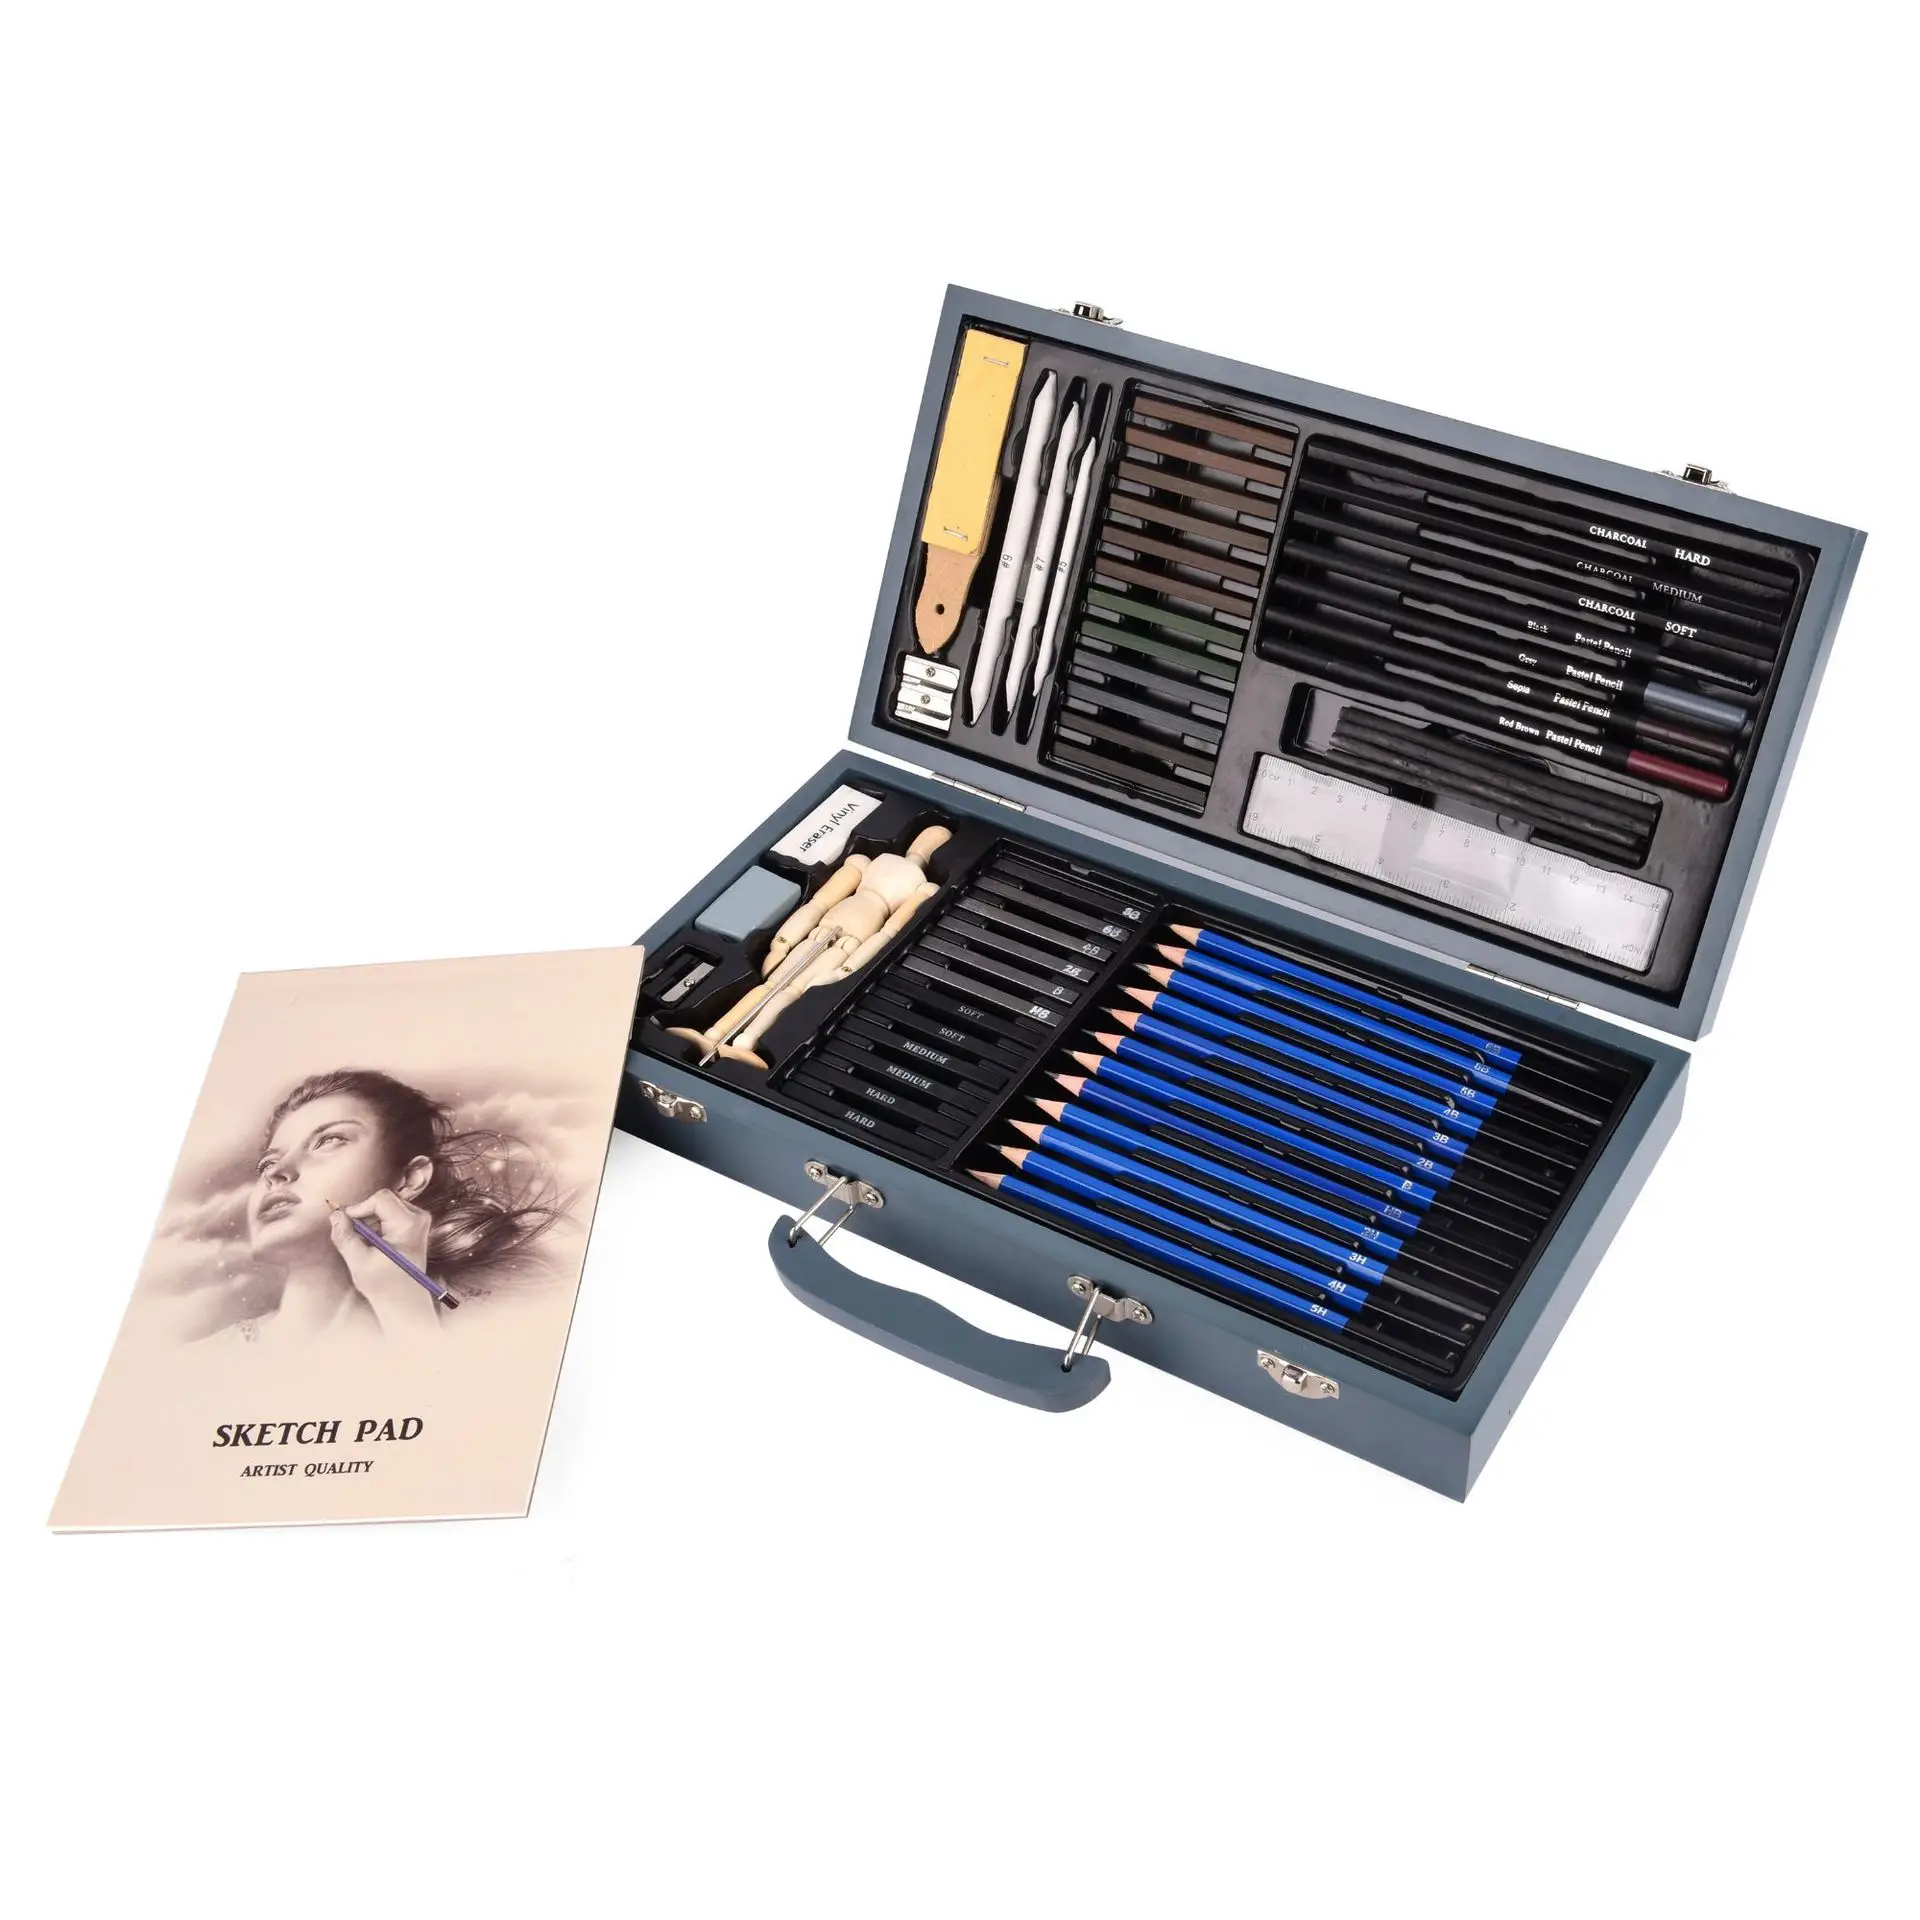 https://ae01.alicdn.com/kf/S26bb173b41474d64988f3b2cf84d92ceM/Charcoal-Brushes-Drawing-Brushes-Wooden-Box-60-Pieces-Sketching-Tools-Professional-Sketching-Drawing-Painting-Set.jpg